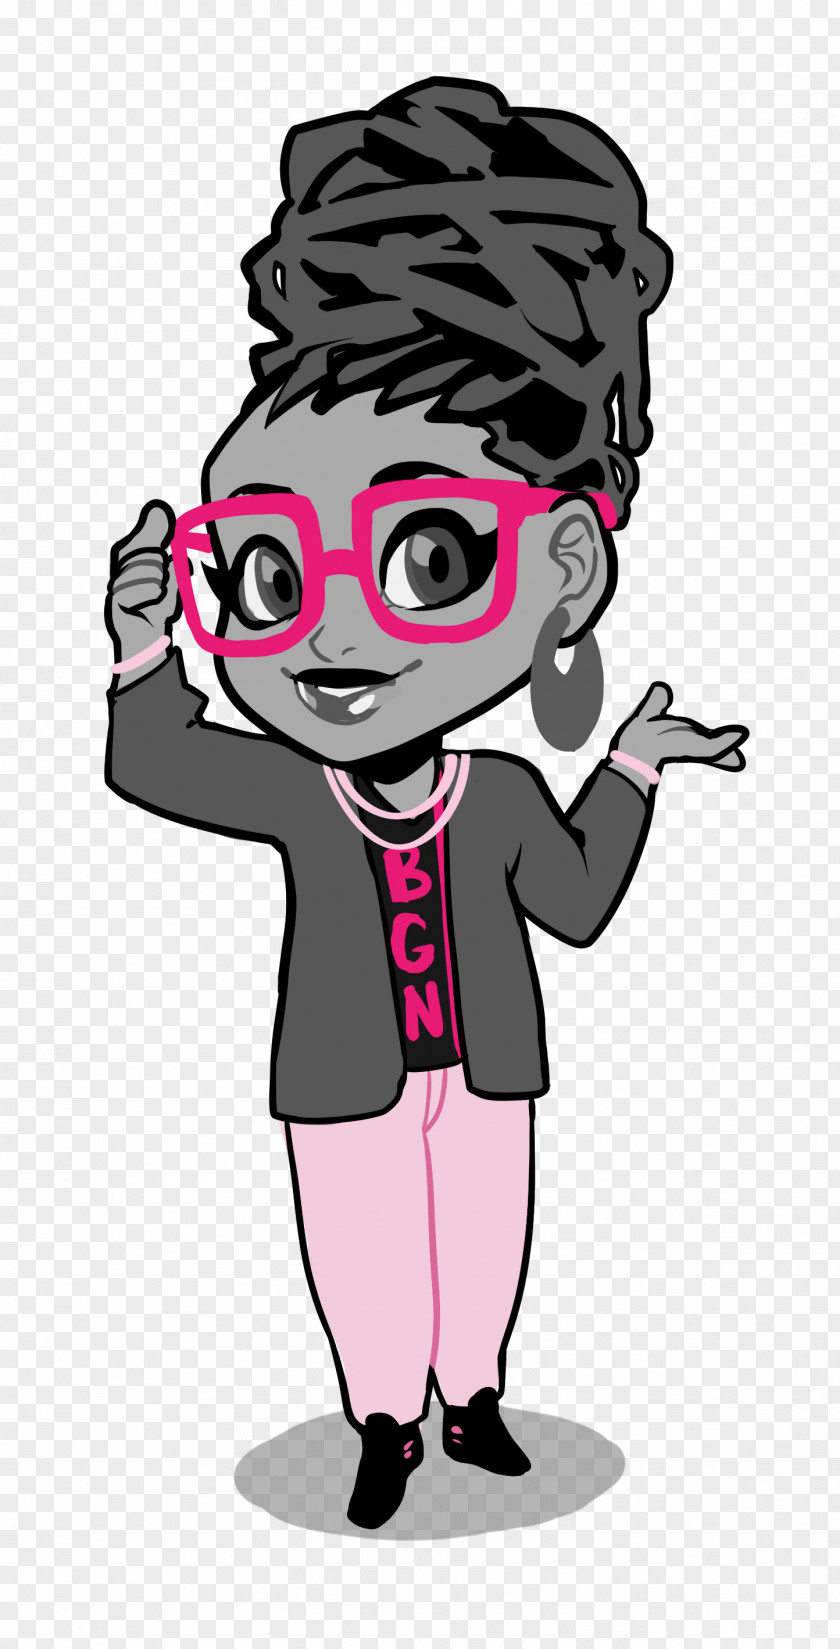 Black Nerd Geek Female Person Of Color PNG